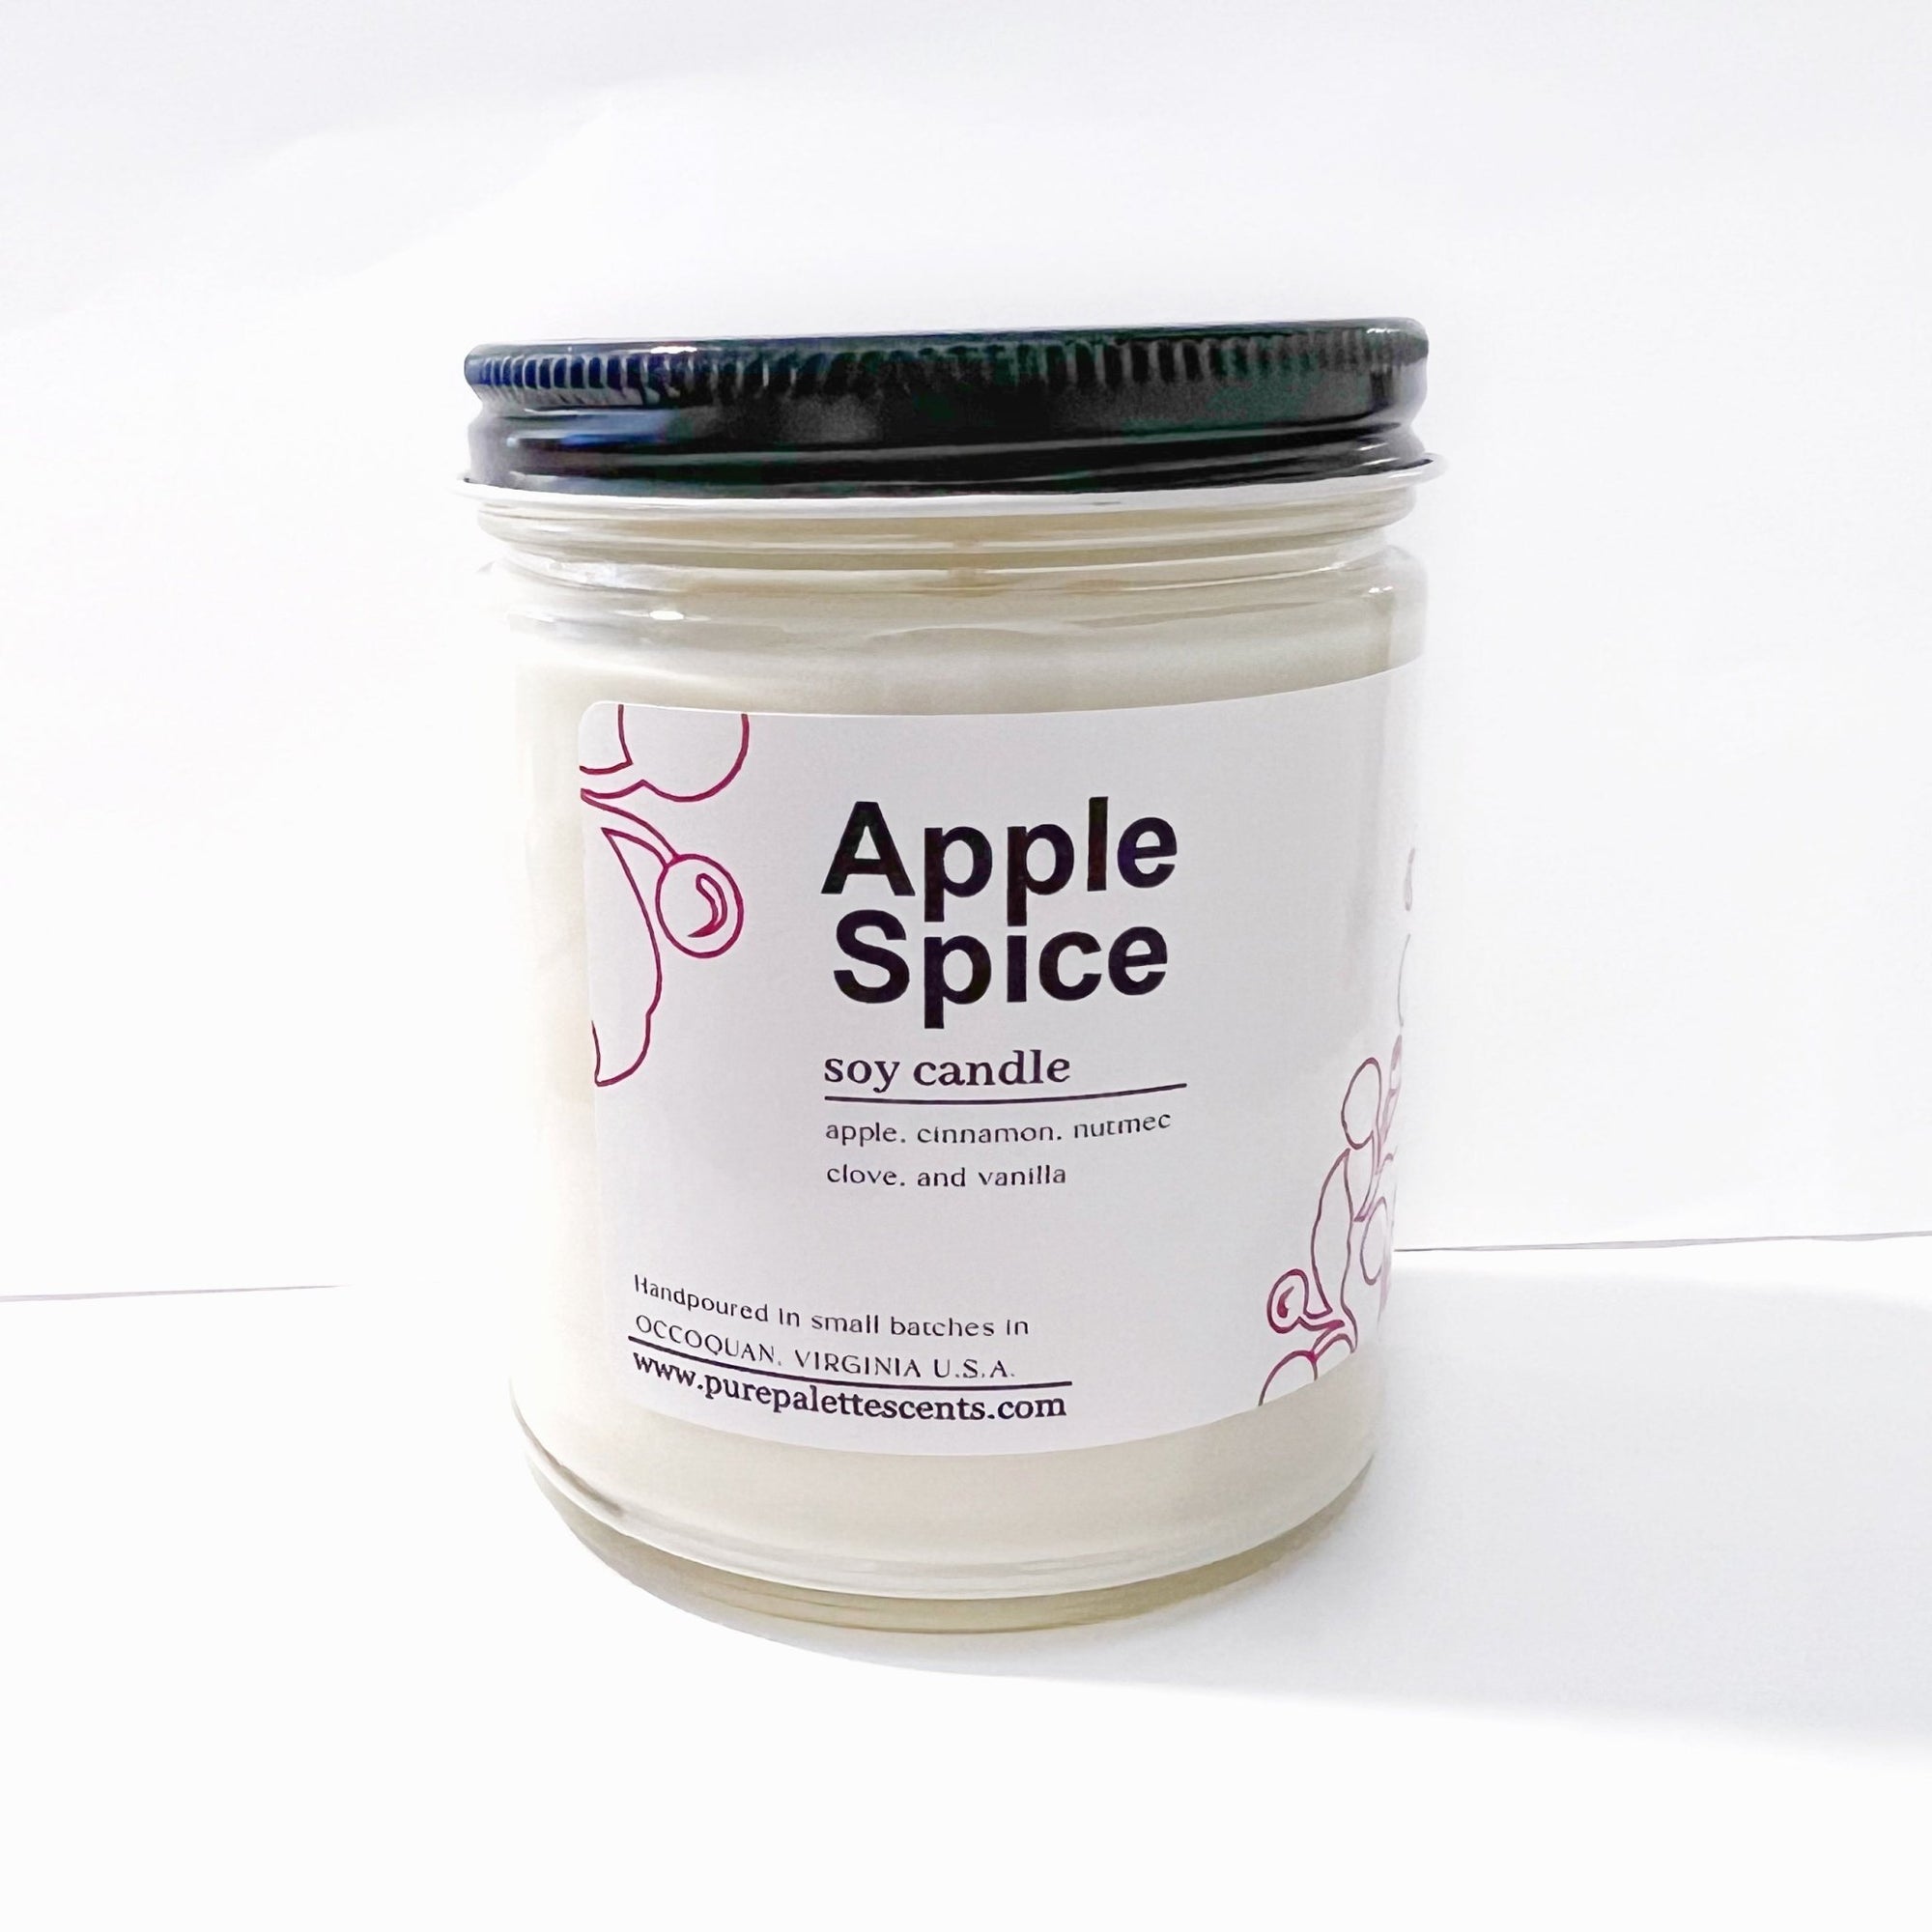 Soy Candle Jar - Apple Spice - Gift & Gather